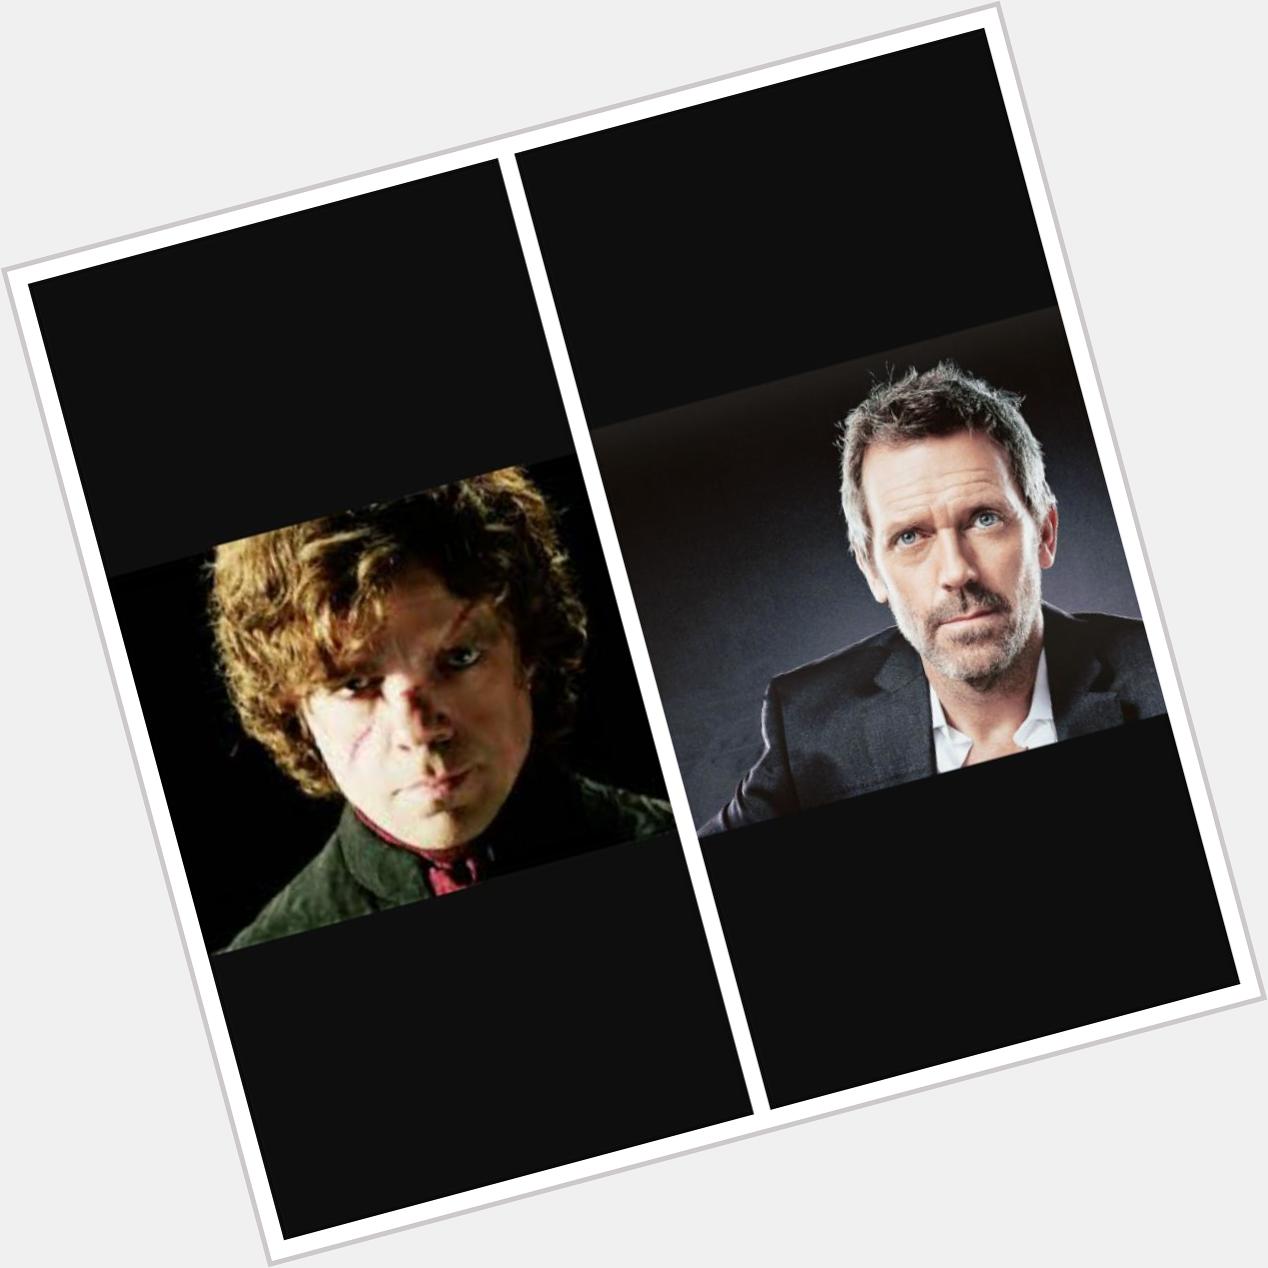 Two geniuses,played 2 great characters with foreign accents flawlessly.Happy birthday Peter Dinklage & Hugh Laurie 